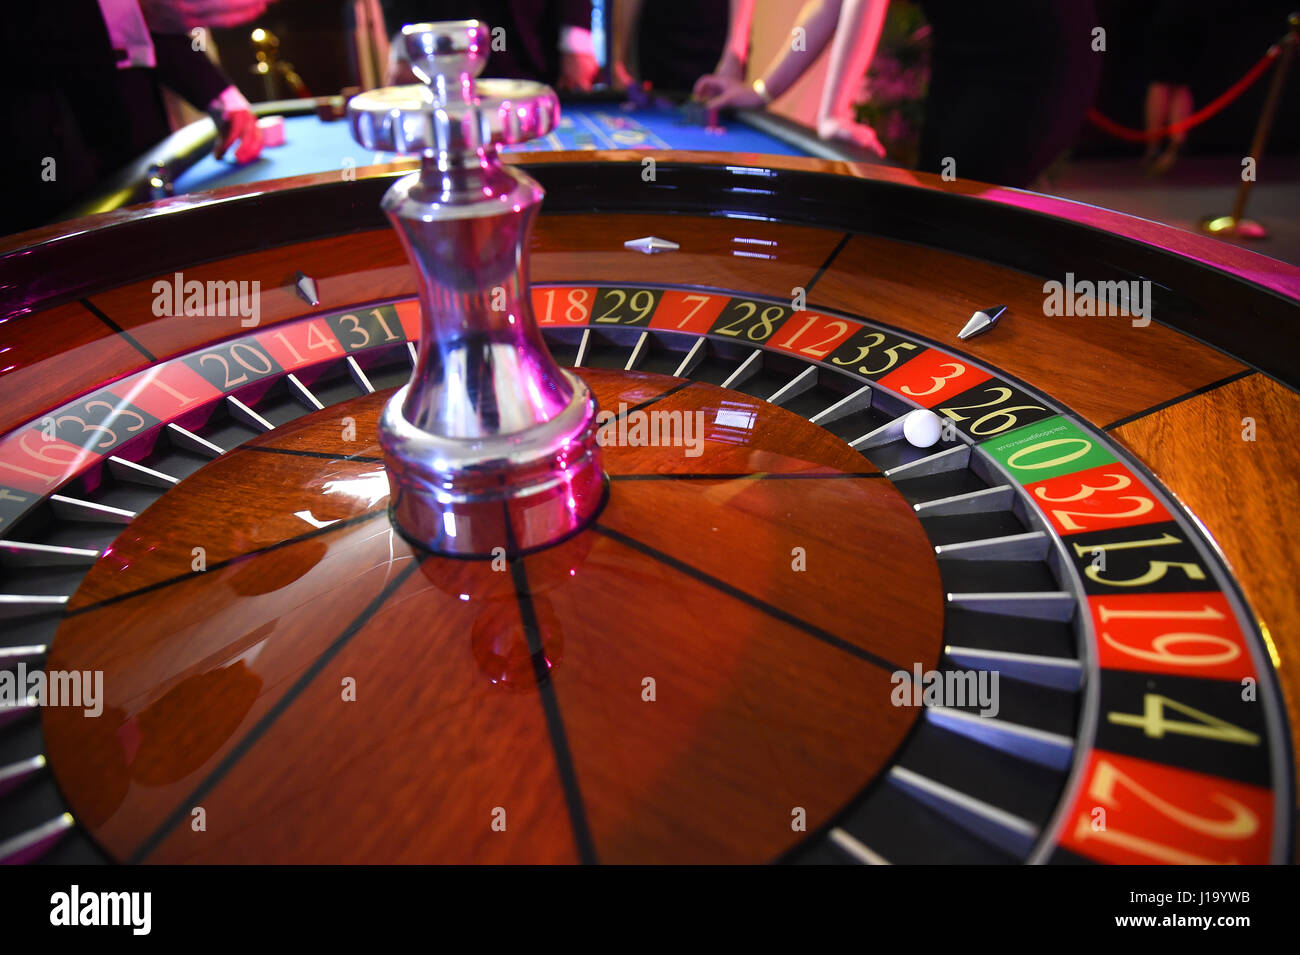 Gambling at the roulette wheel Stock Photo